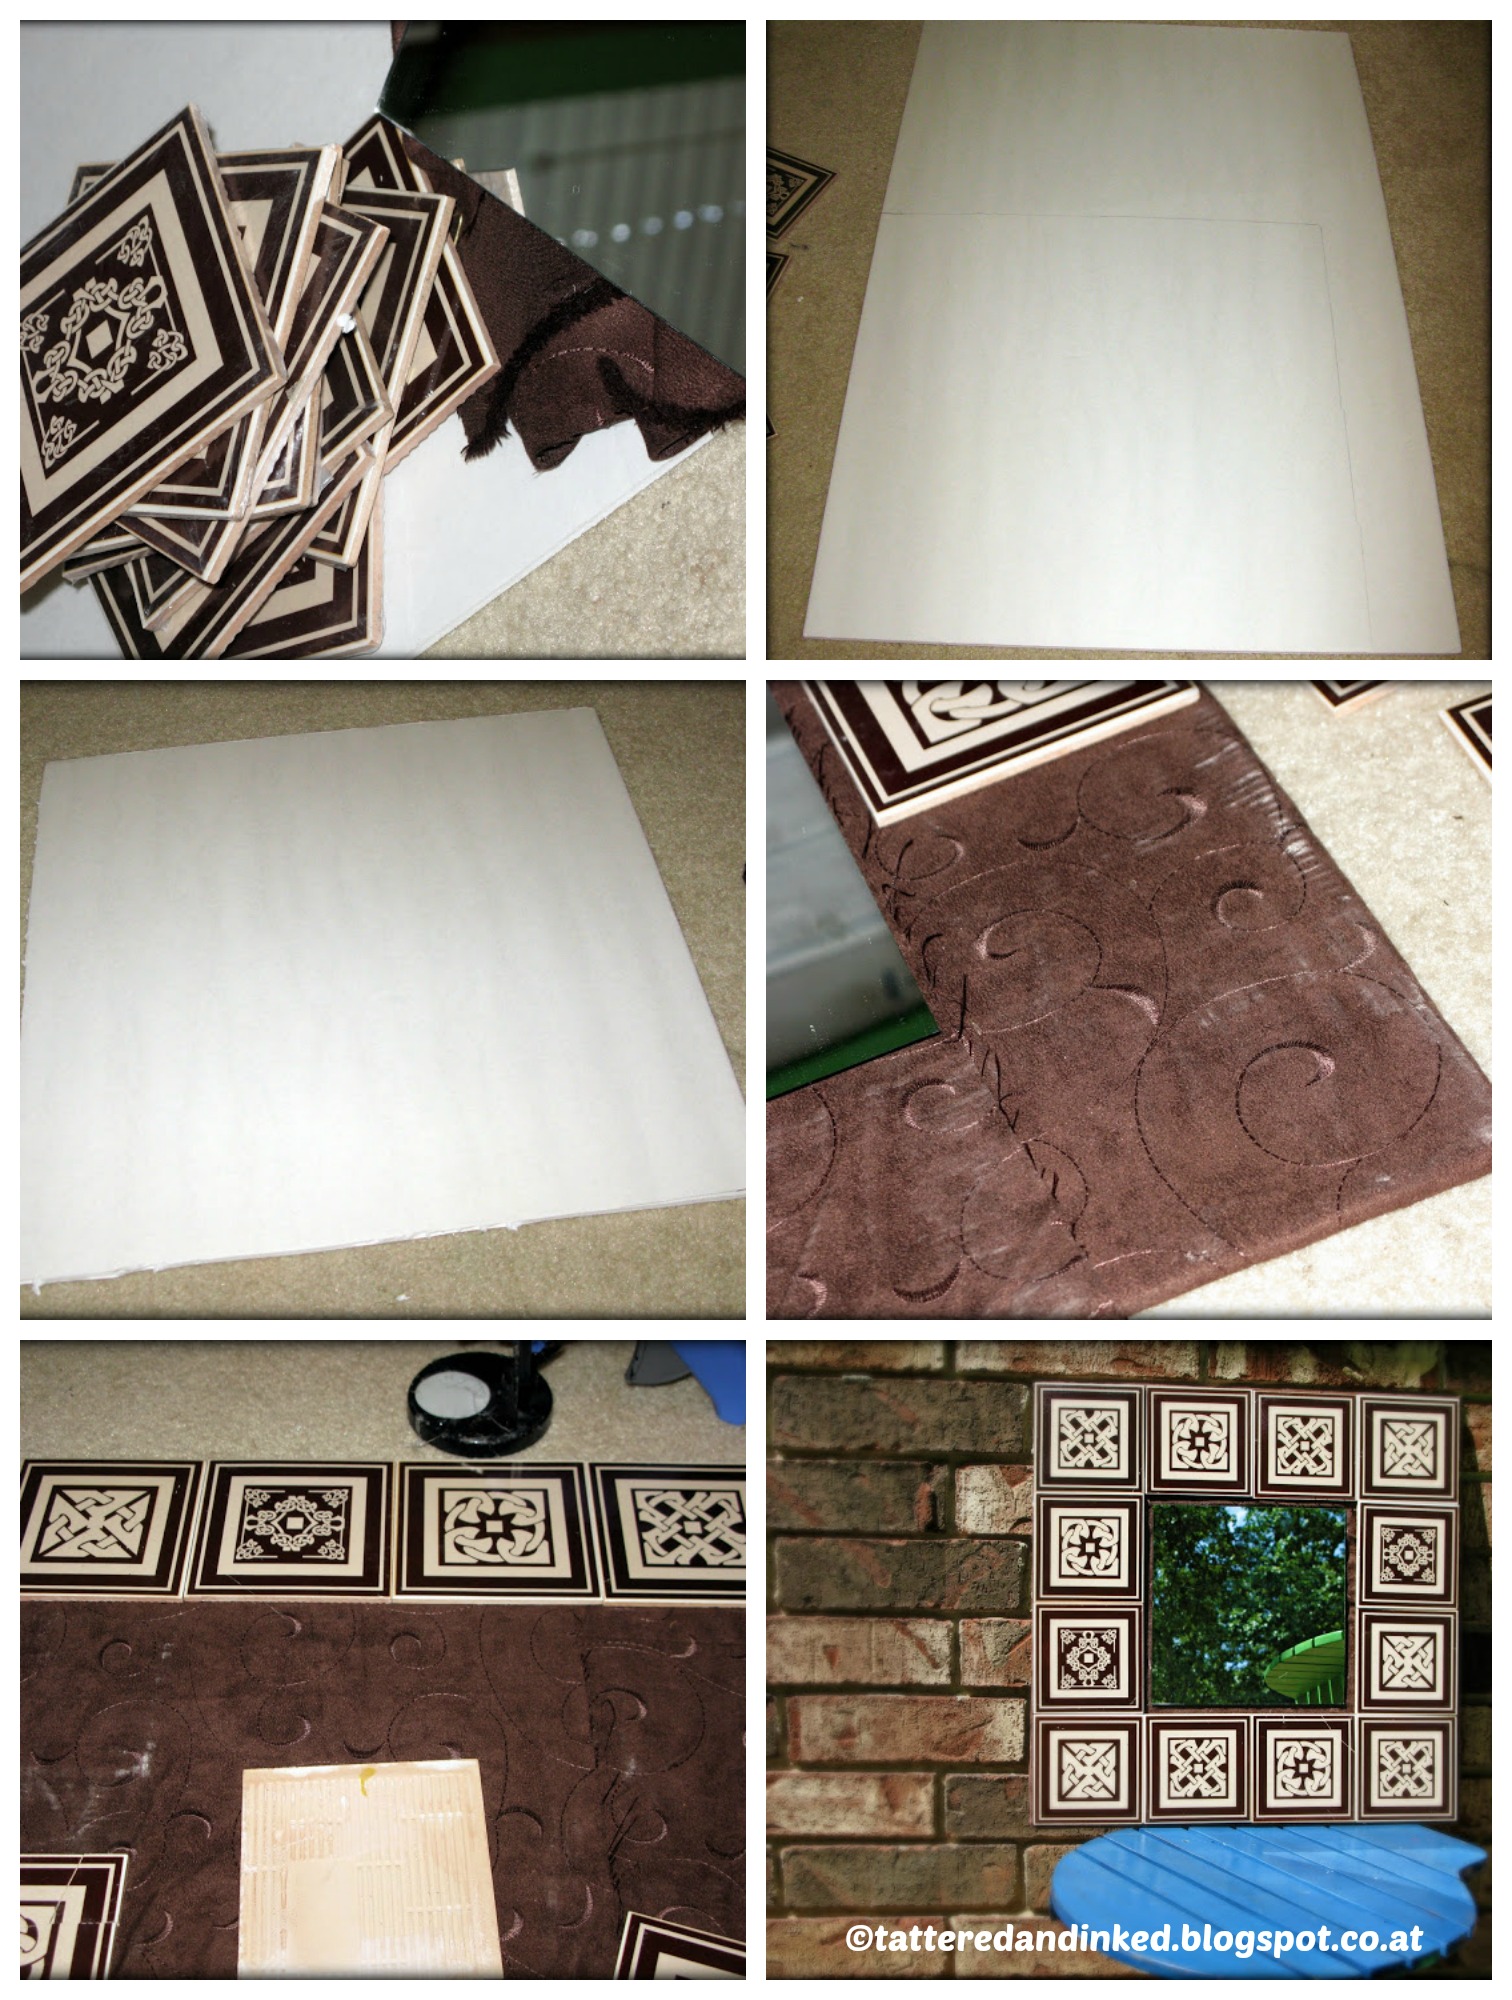 How to make a Dolar Store Tiled Mirror